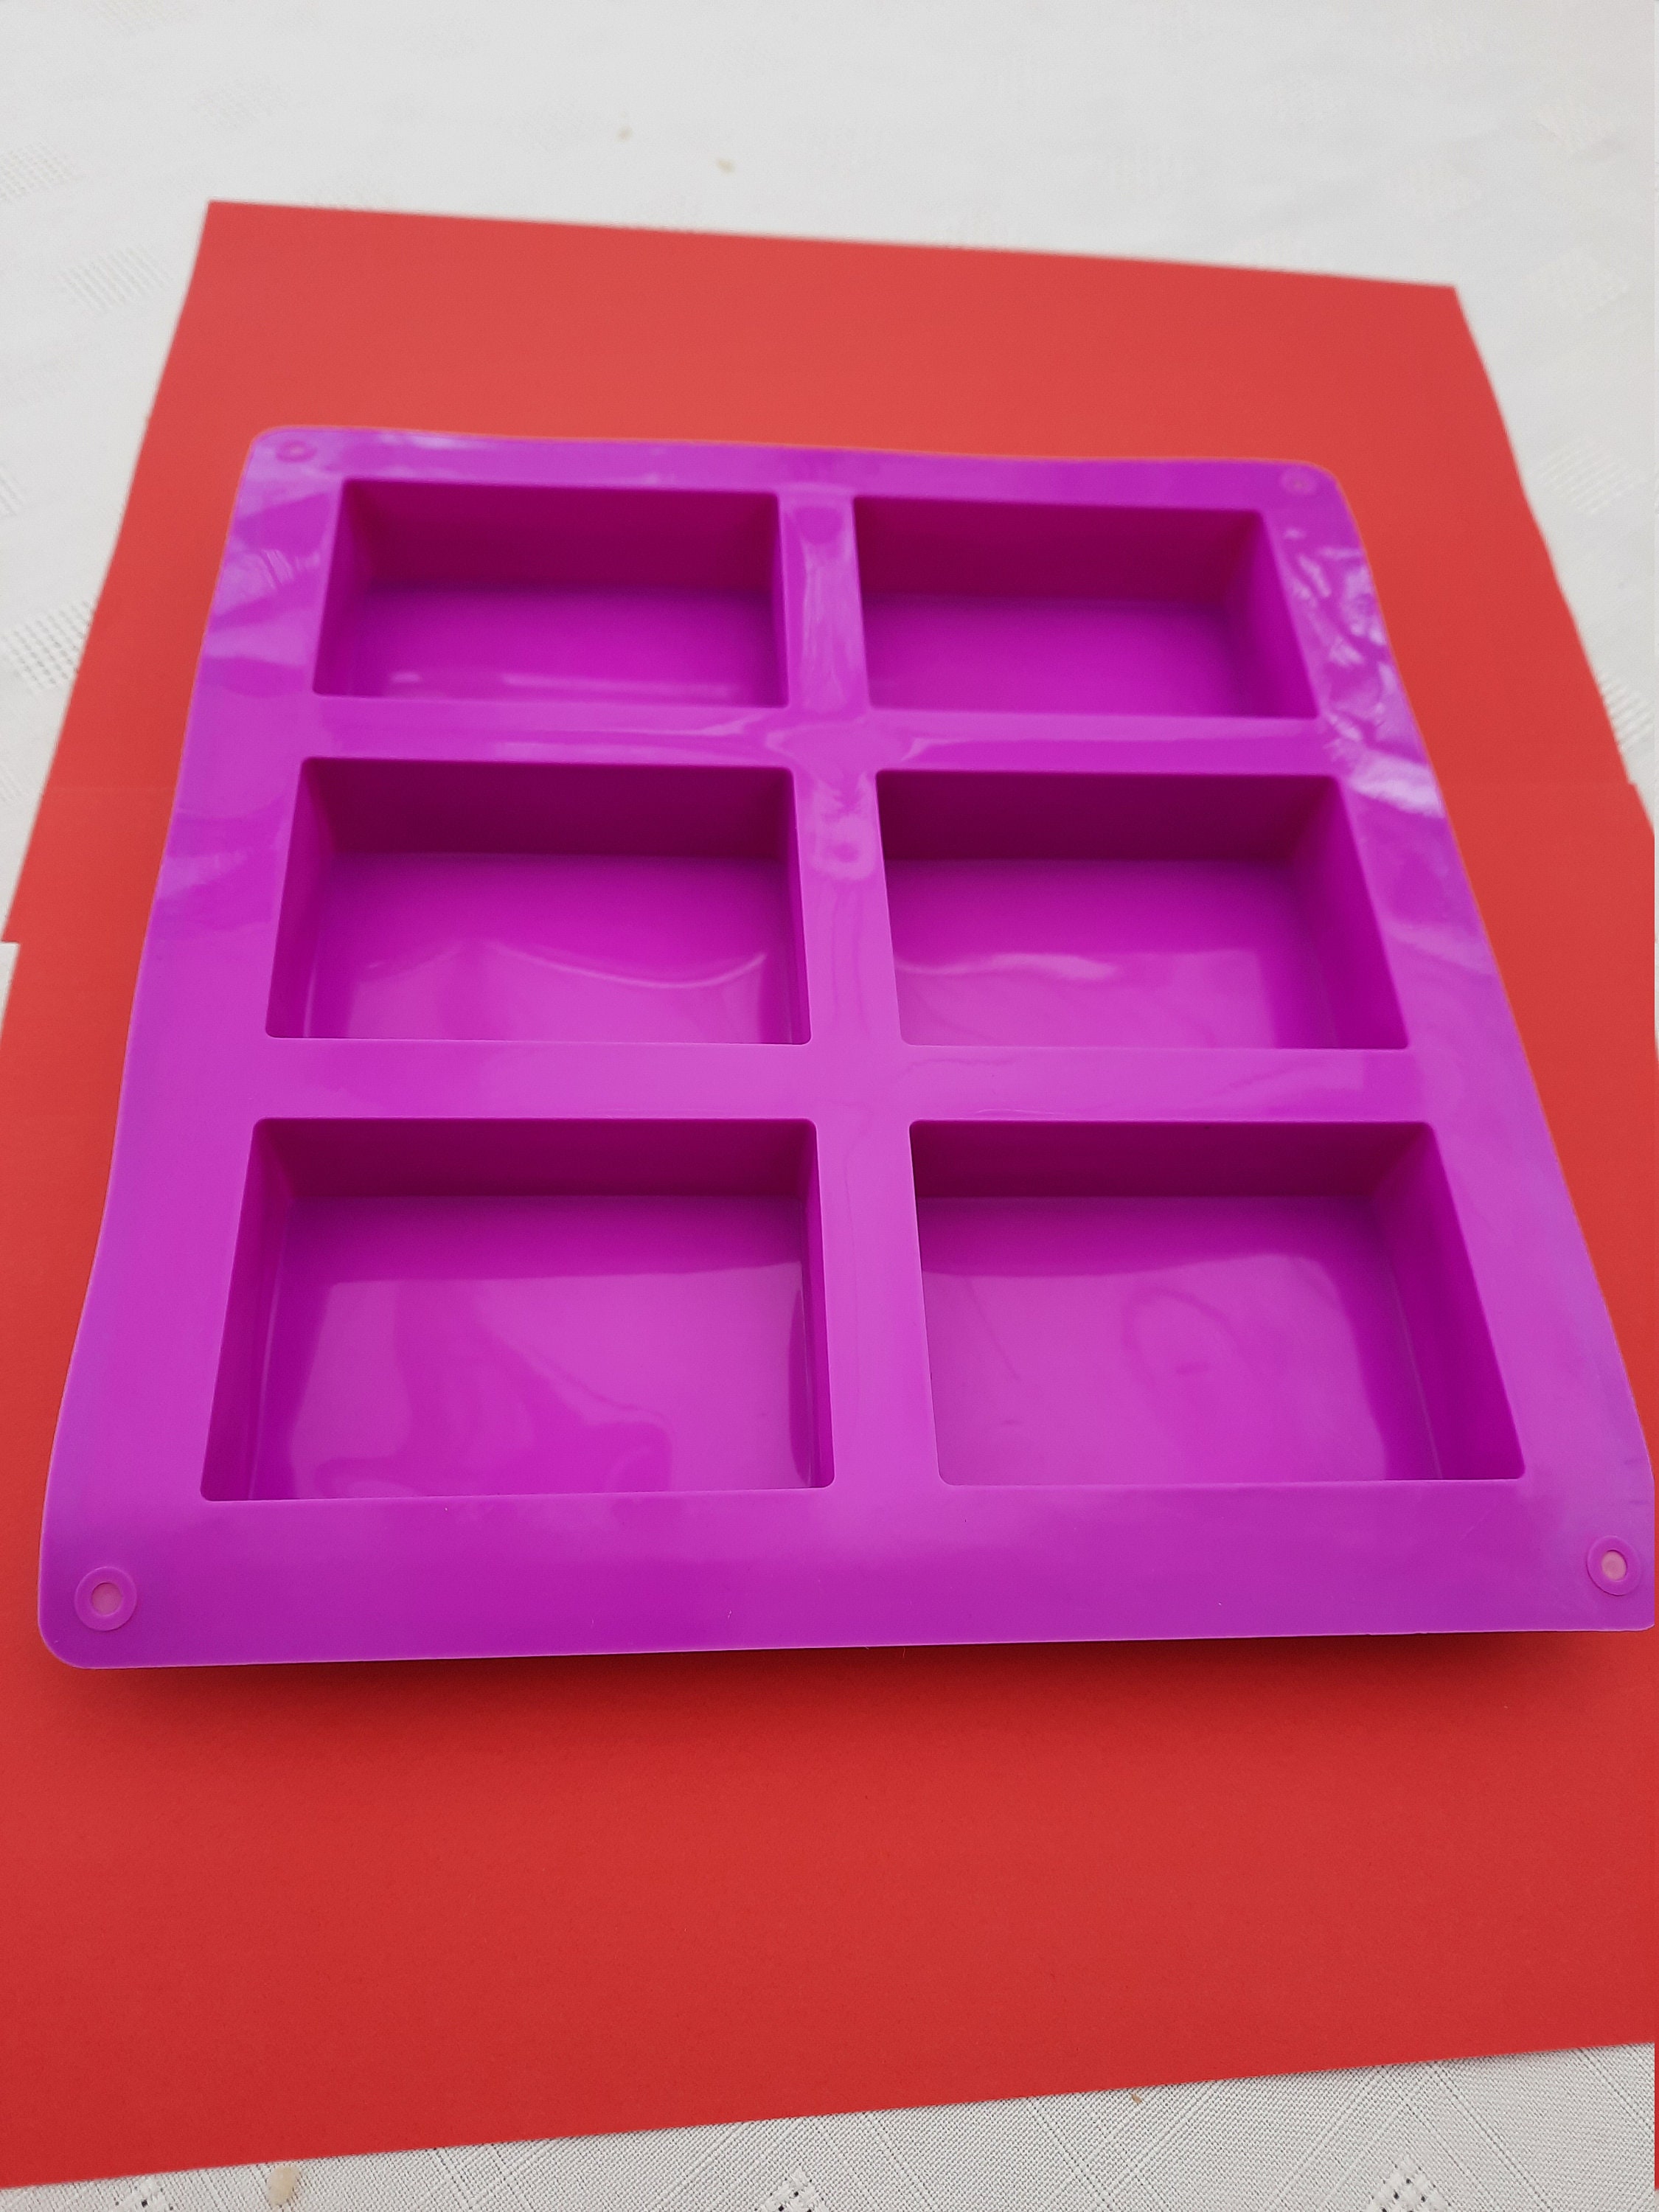 Rectangle Silicone Loaf Mold with Wooden Box - Soap Mold – Pro